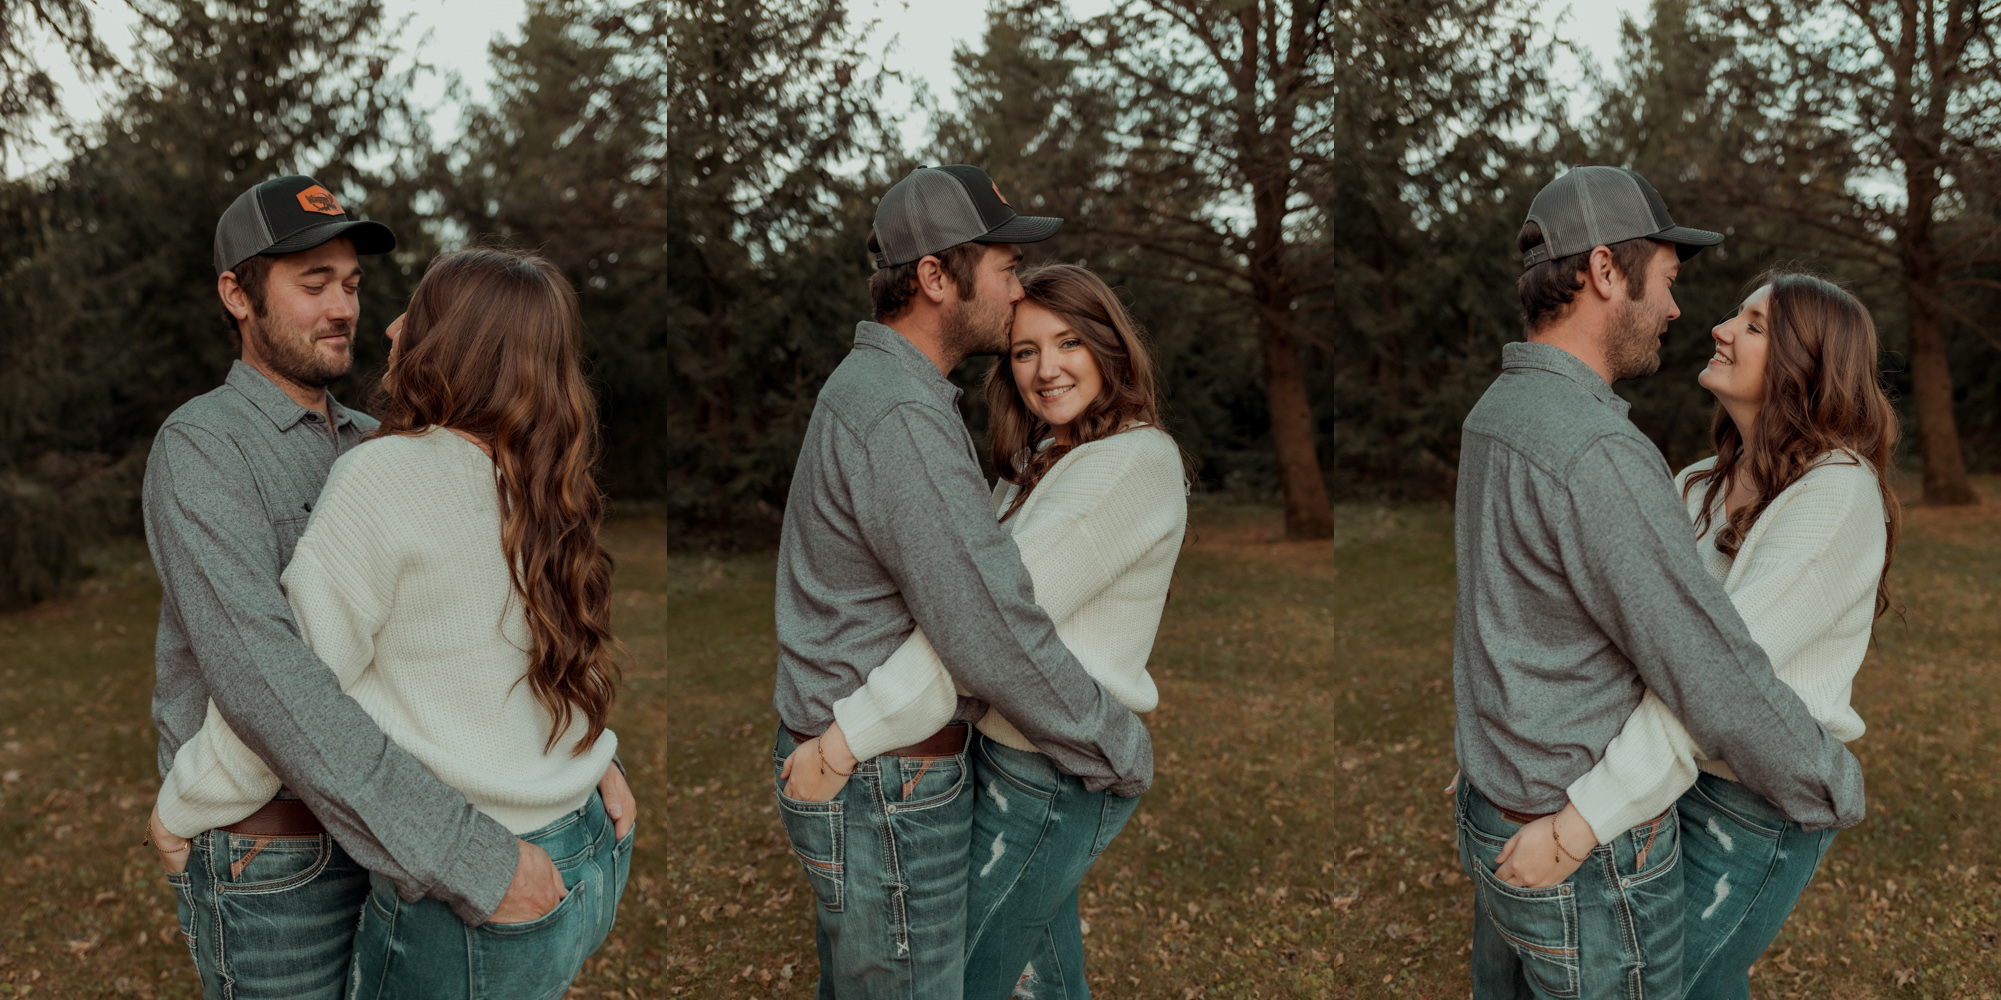 Wildwood Golf Course Engagement Pictures, Charles City, Iowa